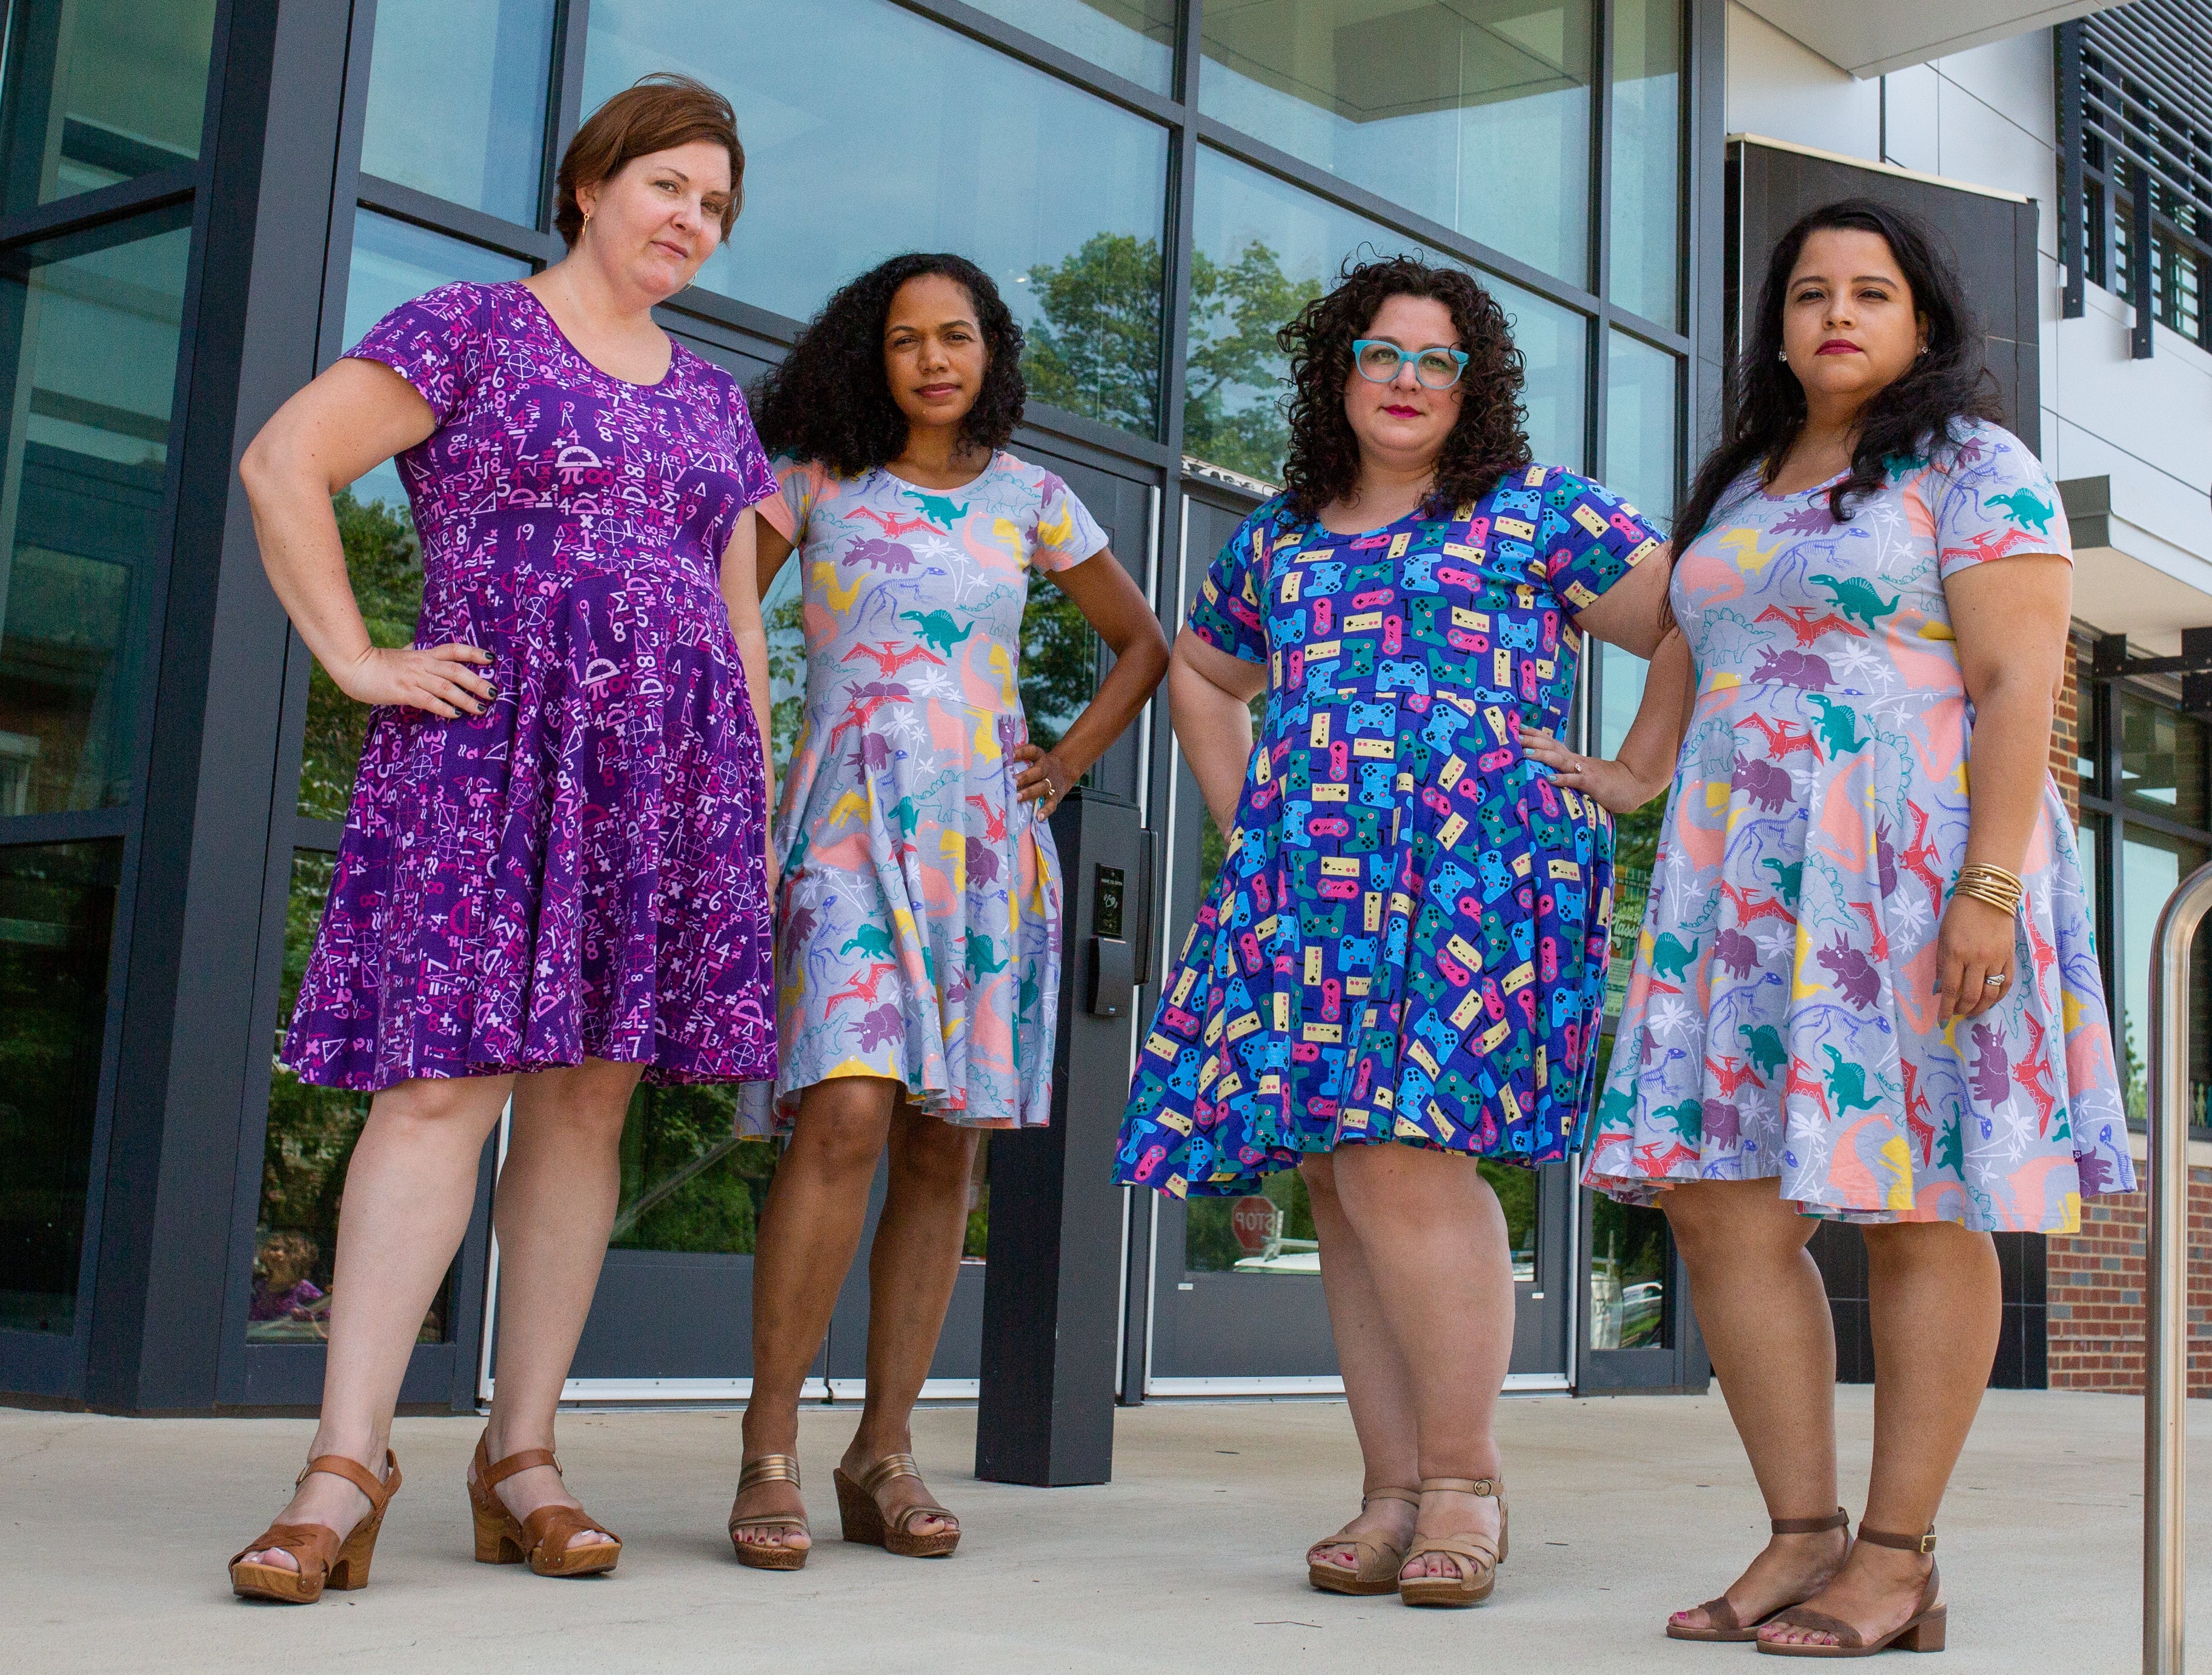 Adults model the new link of dresses from Princess Awesome. 